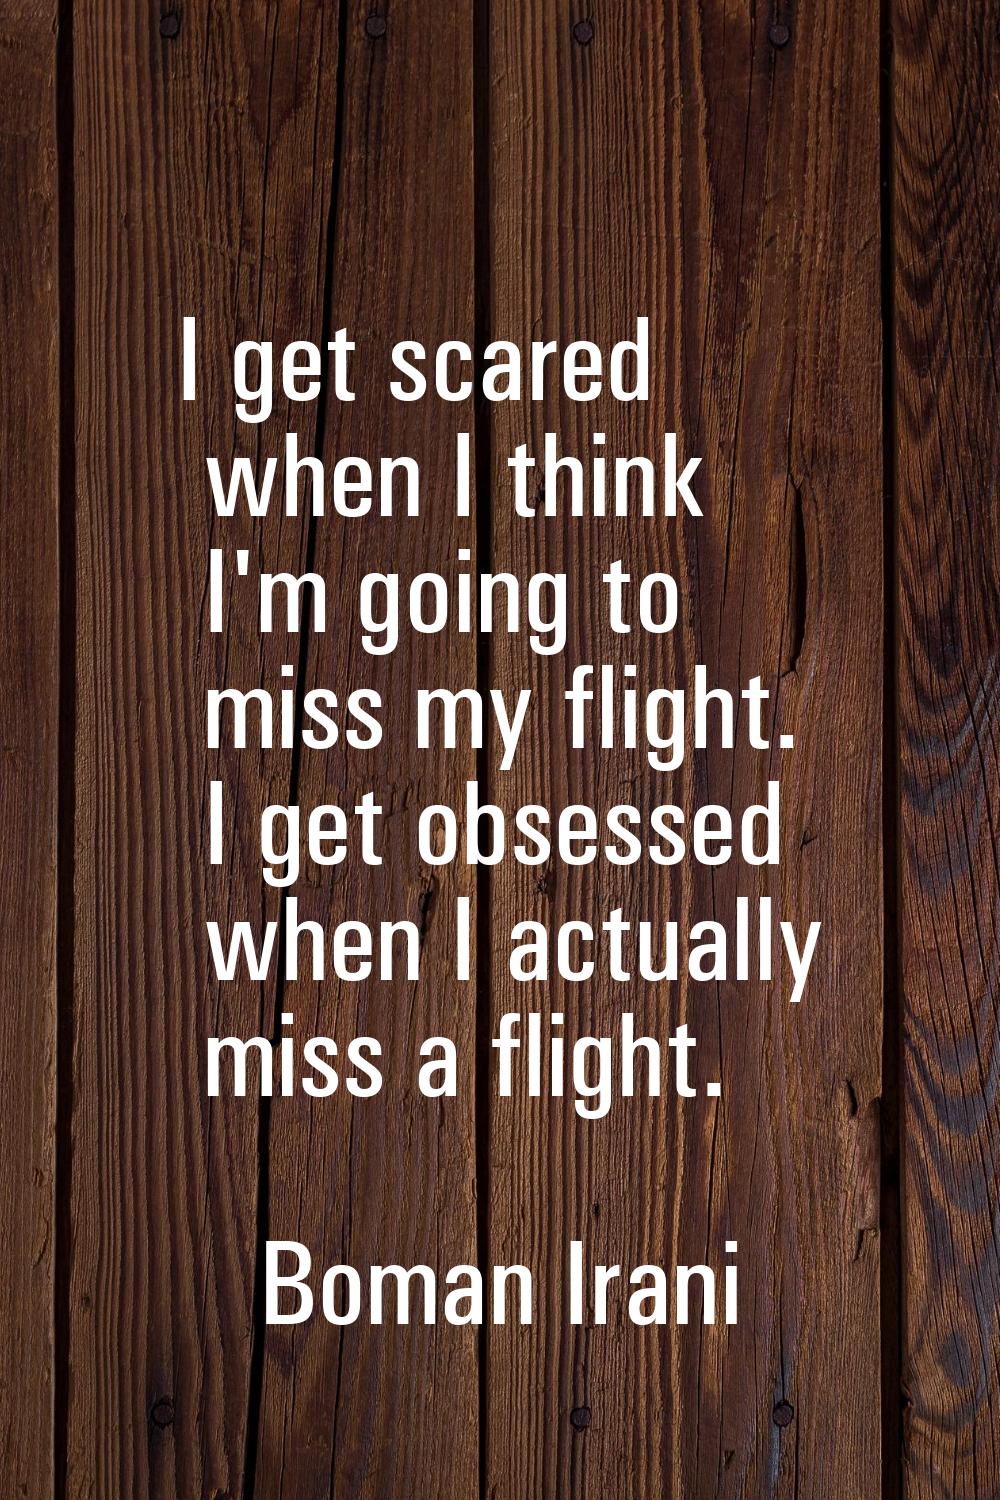 I get scared when I think I'm going to miss my flight. I get obsessed when I actually miss a flight